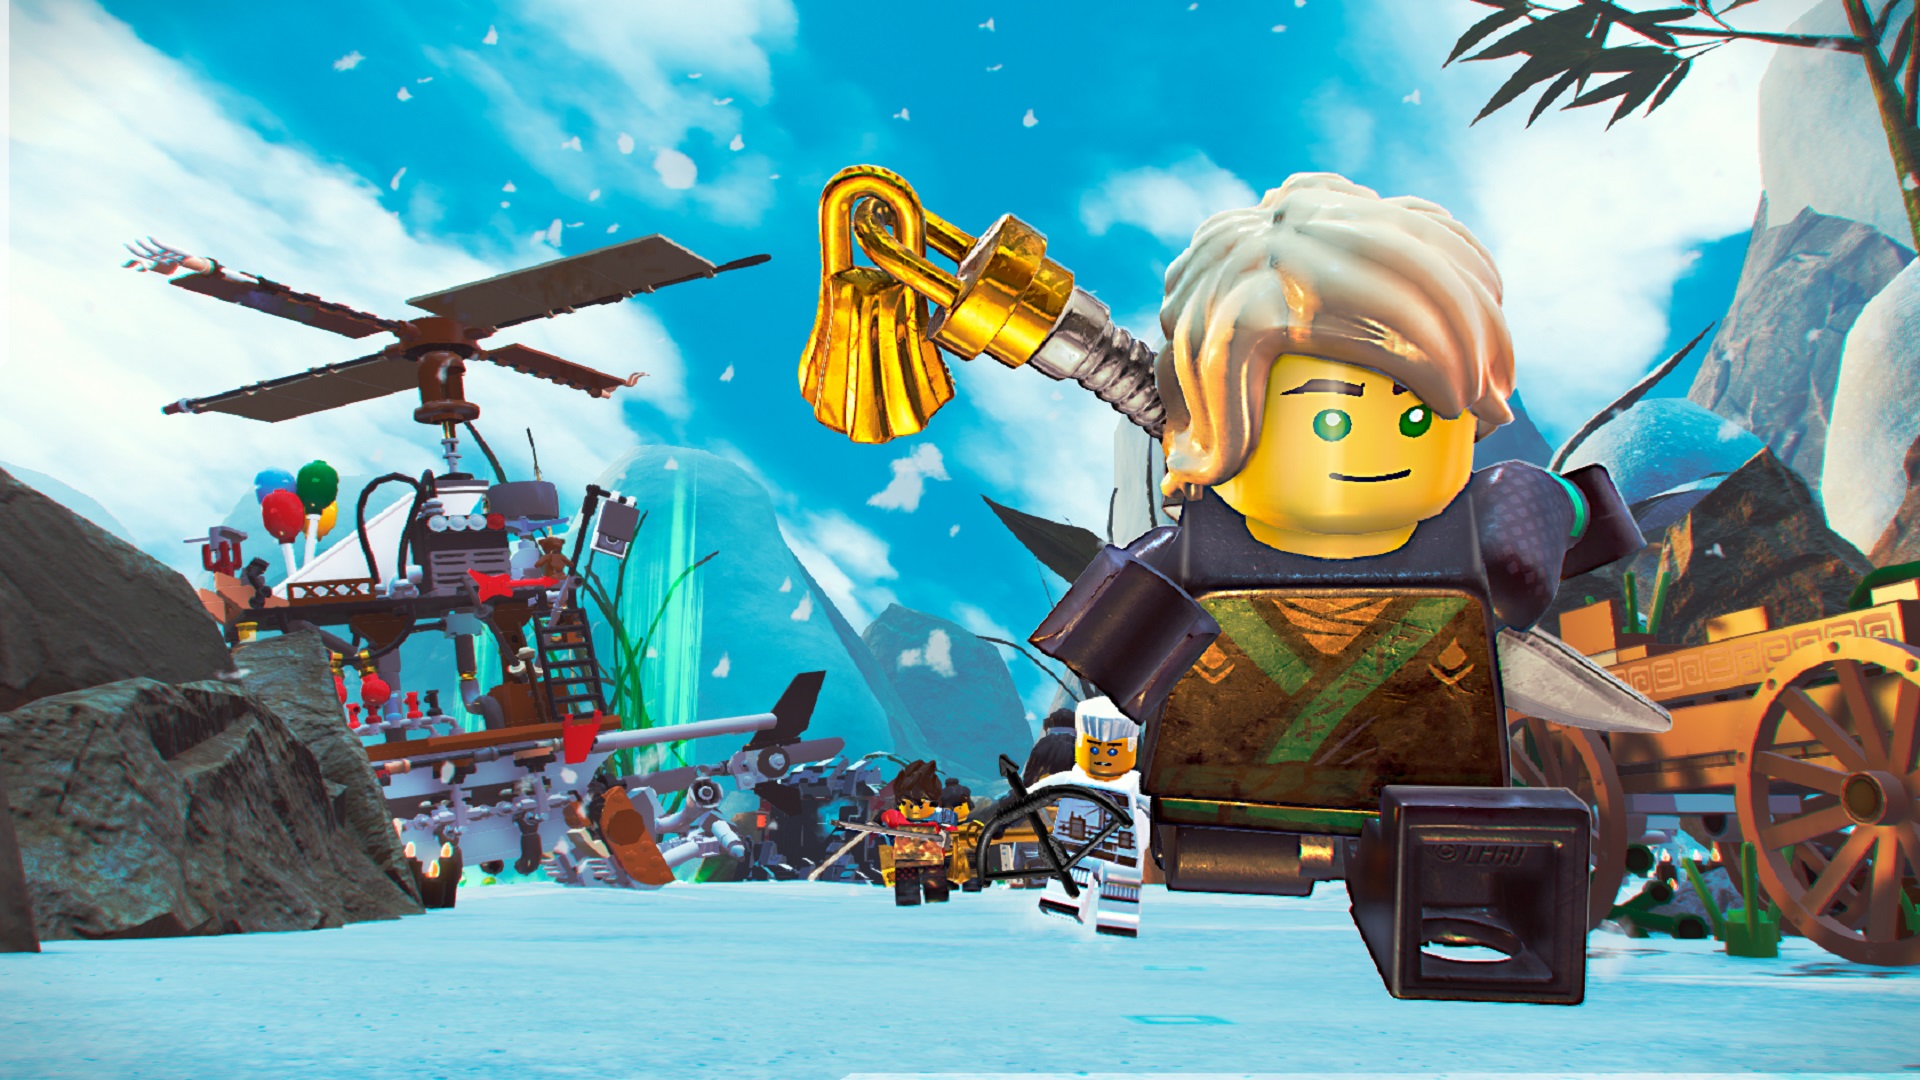 chikane løgner Flagermus Free games: The Lego Ninjago Movie game is free right now on Steam |  PCGamesN